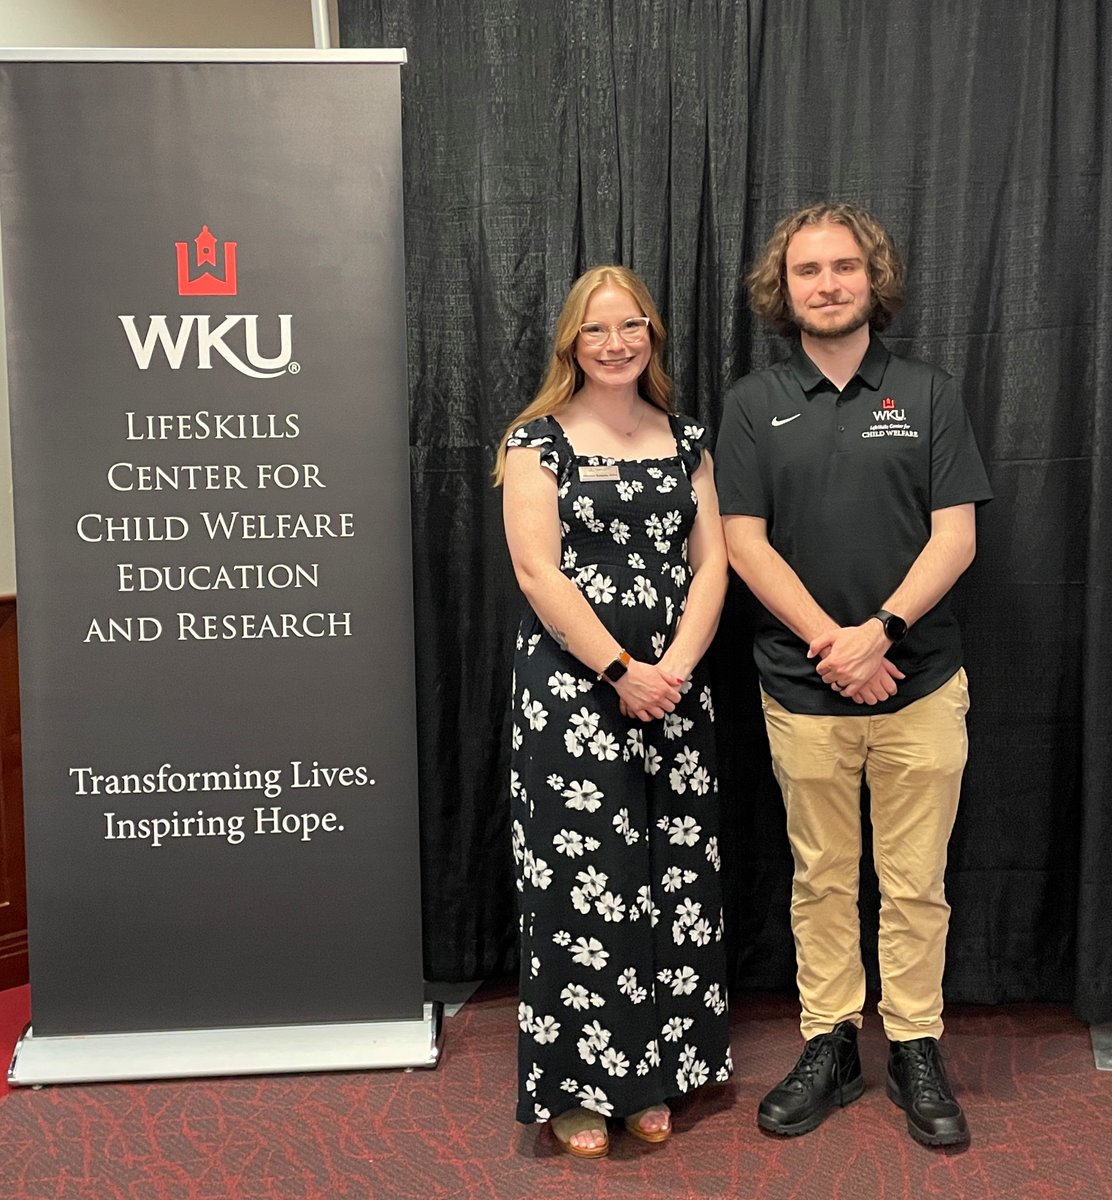 As the semester winds down, we would like to recognize our outstanding GRA's!  Kirsten Spears and Jamison Brown have been assets to the Center this year. We are very proud to have been a part of their graduate school career! @wku @CHHS_WKU @GriffithsPhD @WKUCEBS @WKUSocialWork